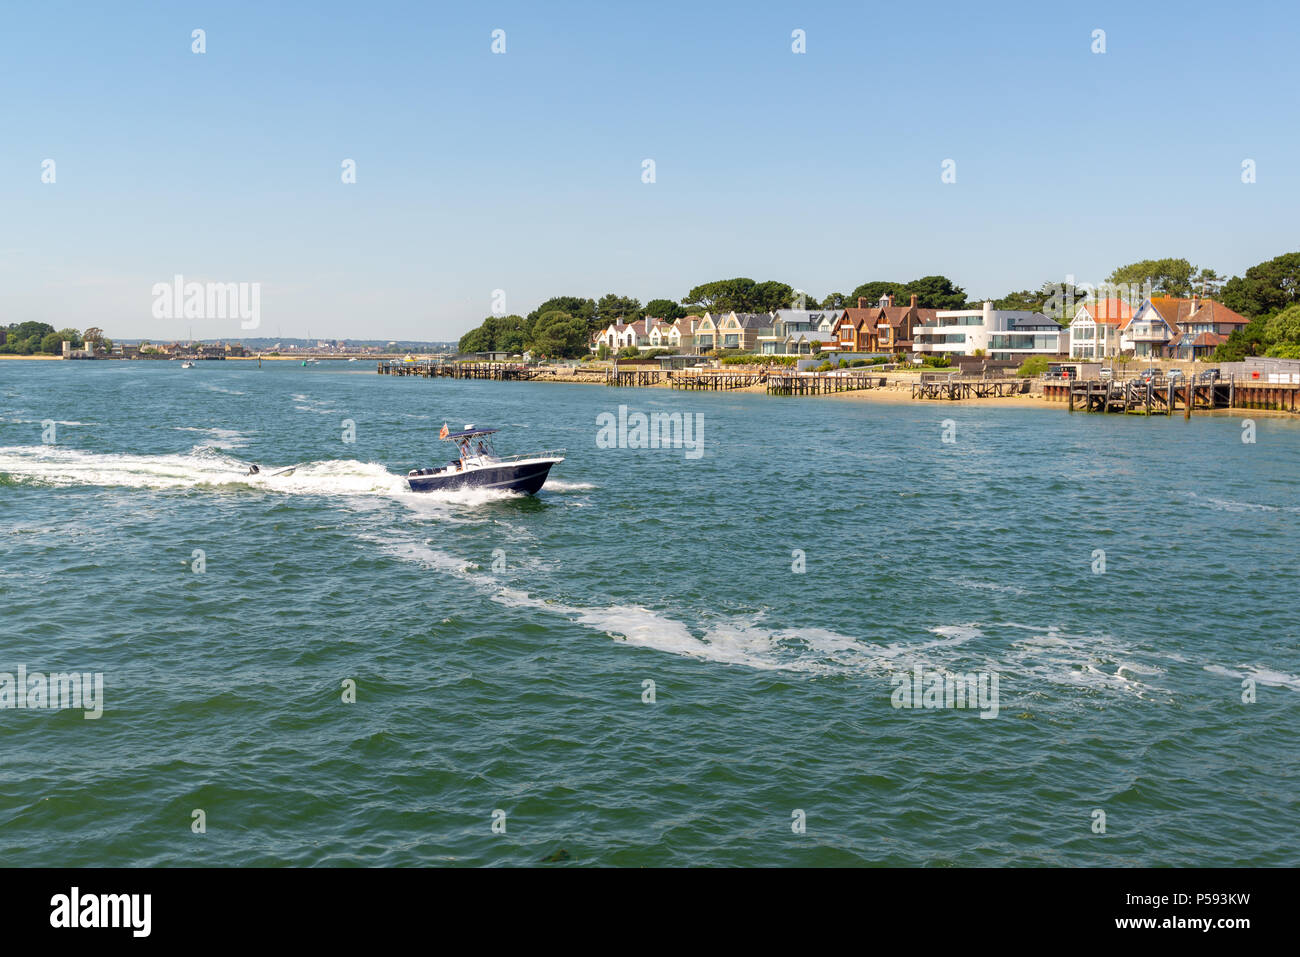 Boat speeding out of Poole Harbour, Dorset, England, UK and past some exclusive seafront property on the Sandbanks peninsula. Stock Photo